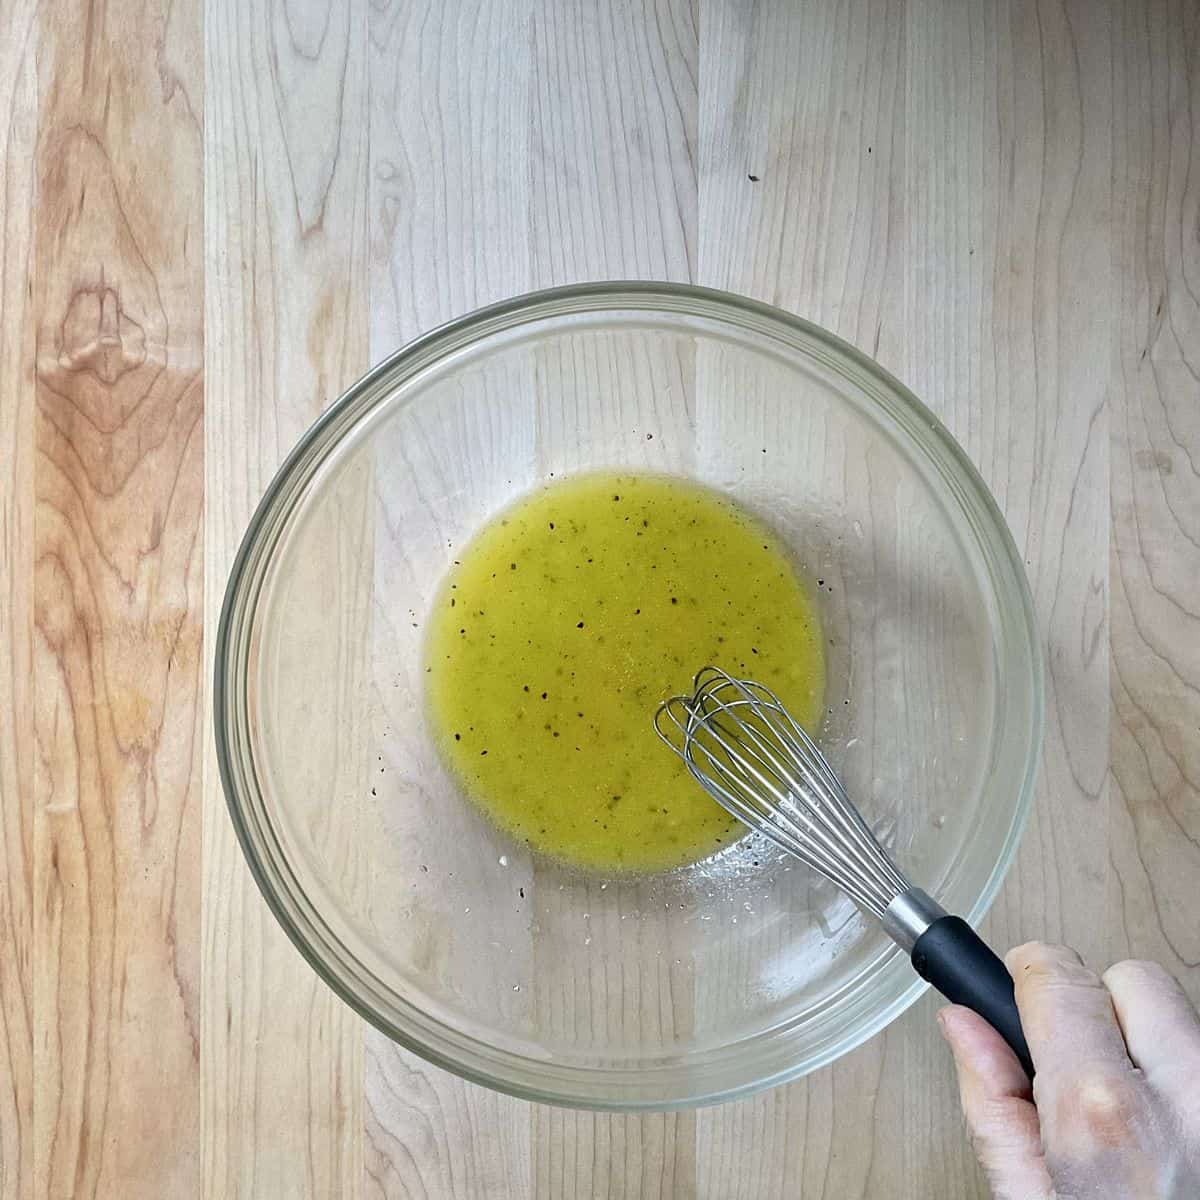 The salad dressing being whisked together in a bowl.